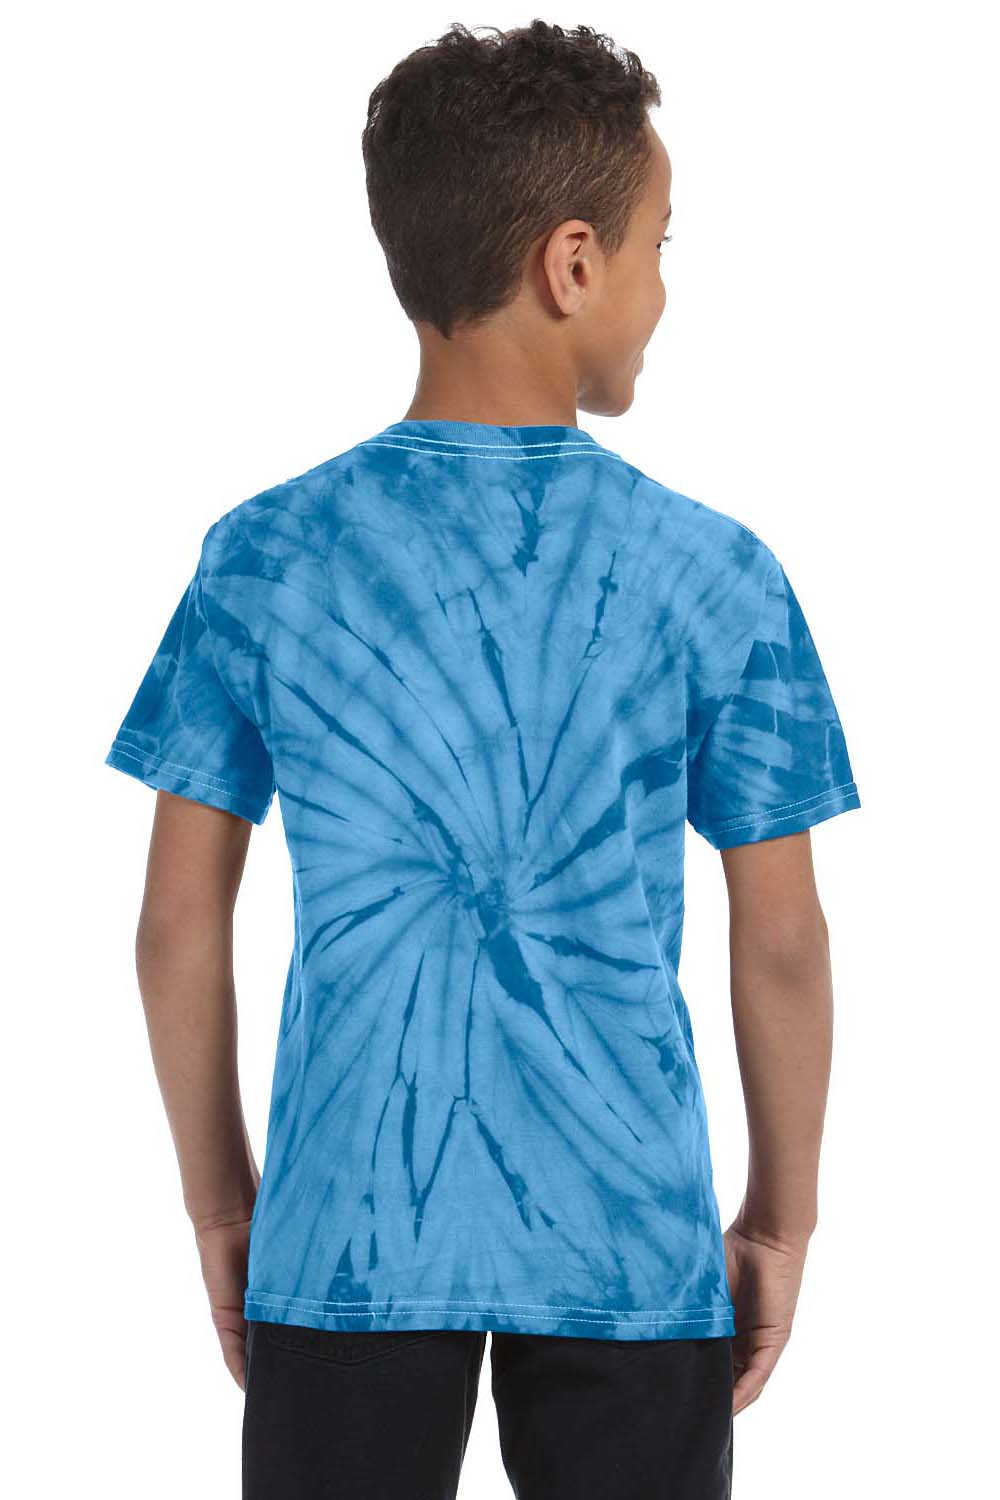 Tie-Dye CD101Y Youth Short Sleeve Crewneck T-Shirt Turquoise Blue Back